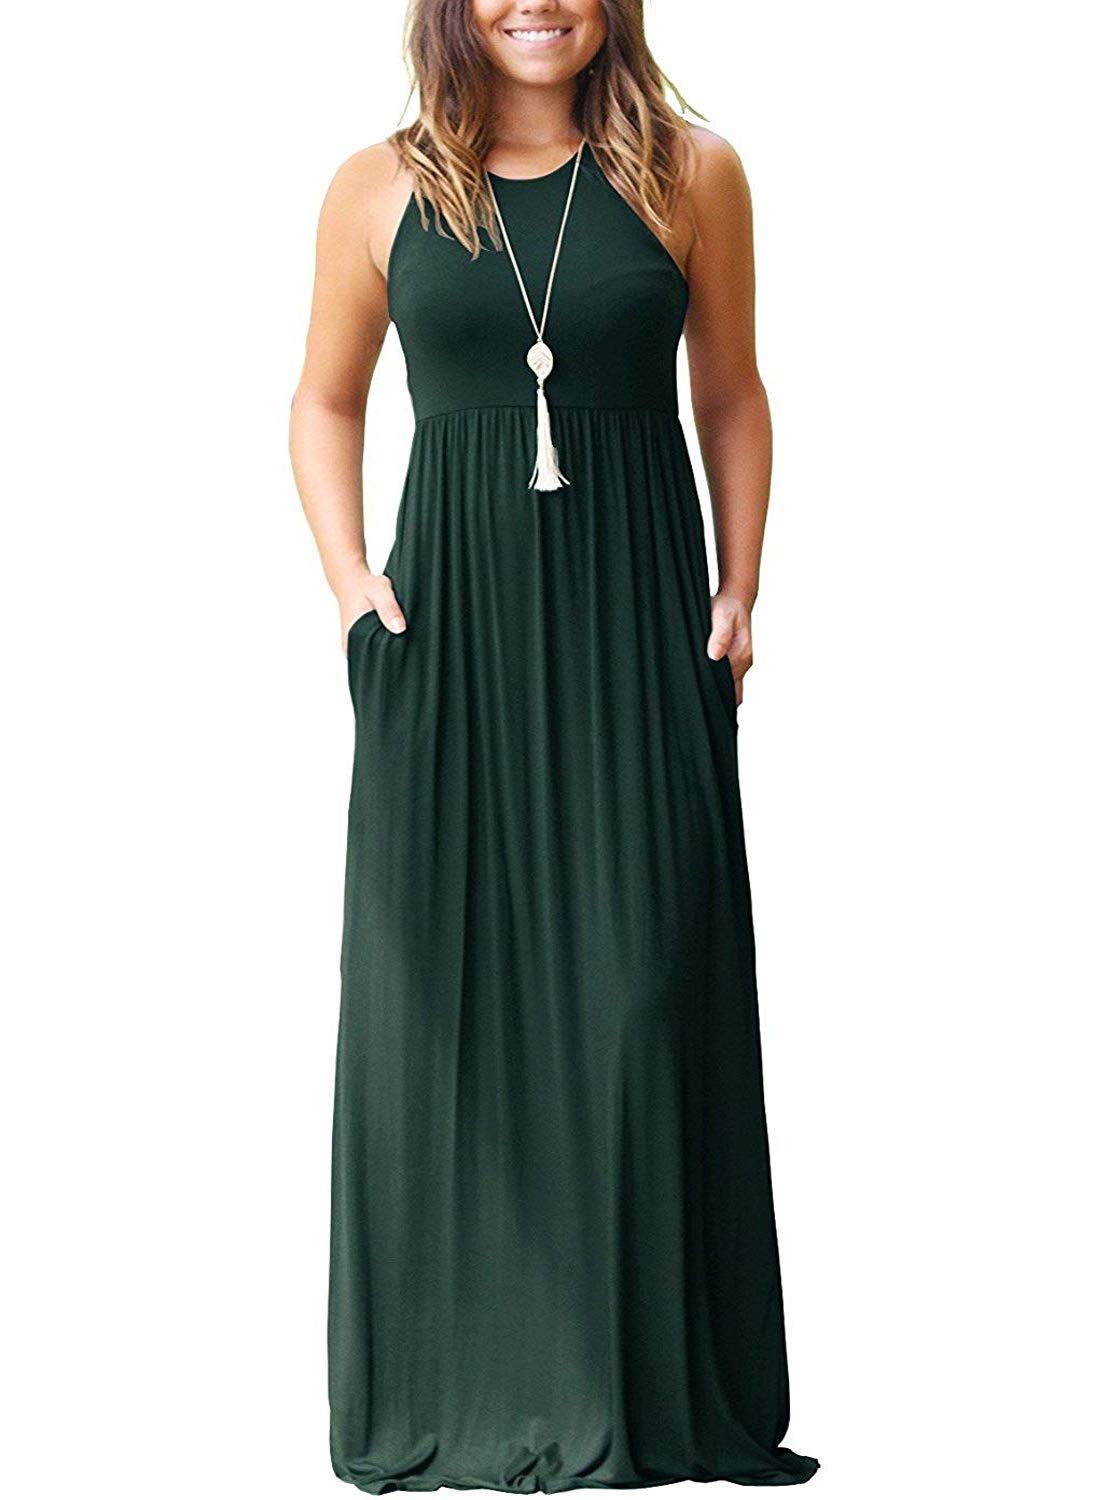 Women's Summer Casual Maxi Dresses Beach Cover Up Loose Empire Waist Long Dresses with Pocket | Amazon (US)